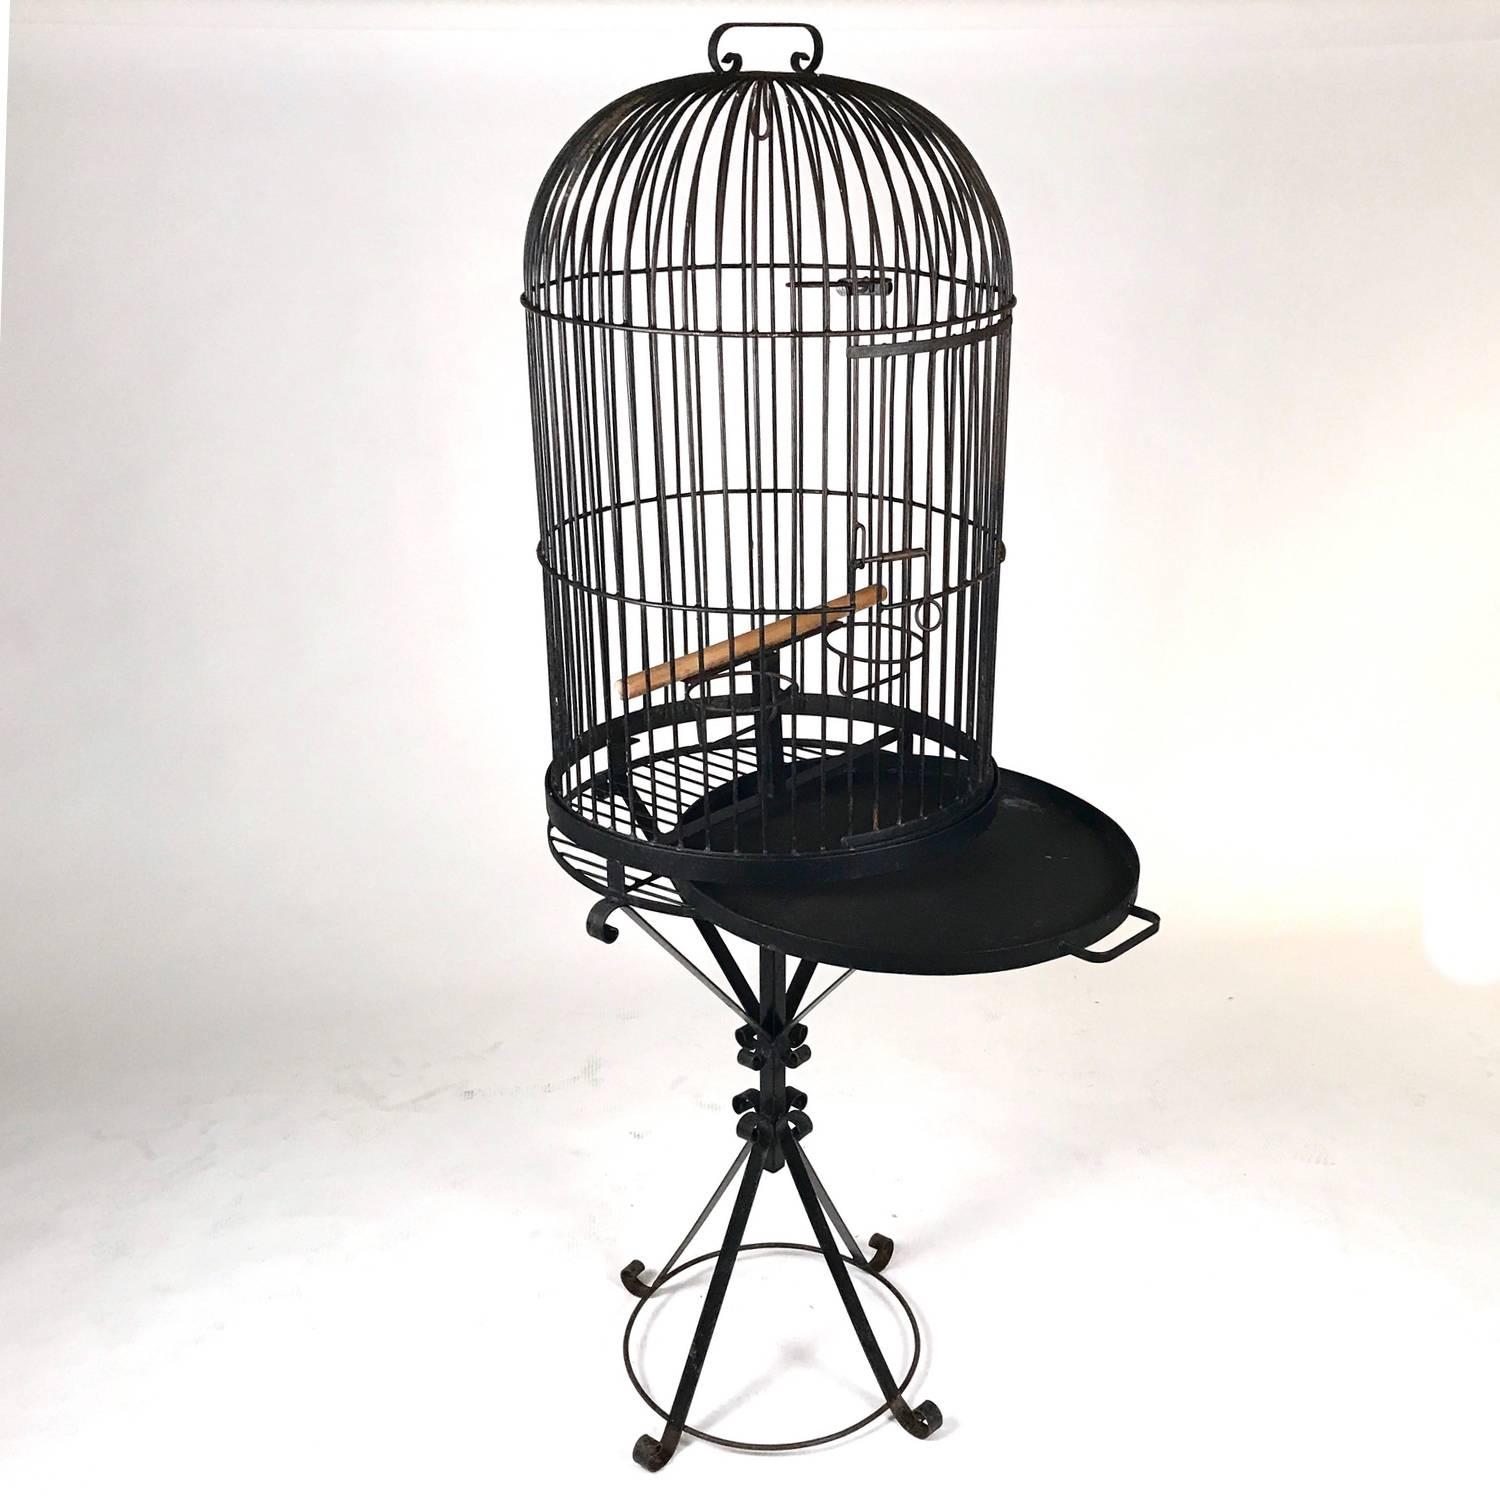 American Monumental Wrought Iron Parrot Birdcage on Pedestal, Early 20th Century